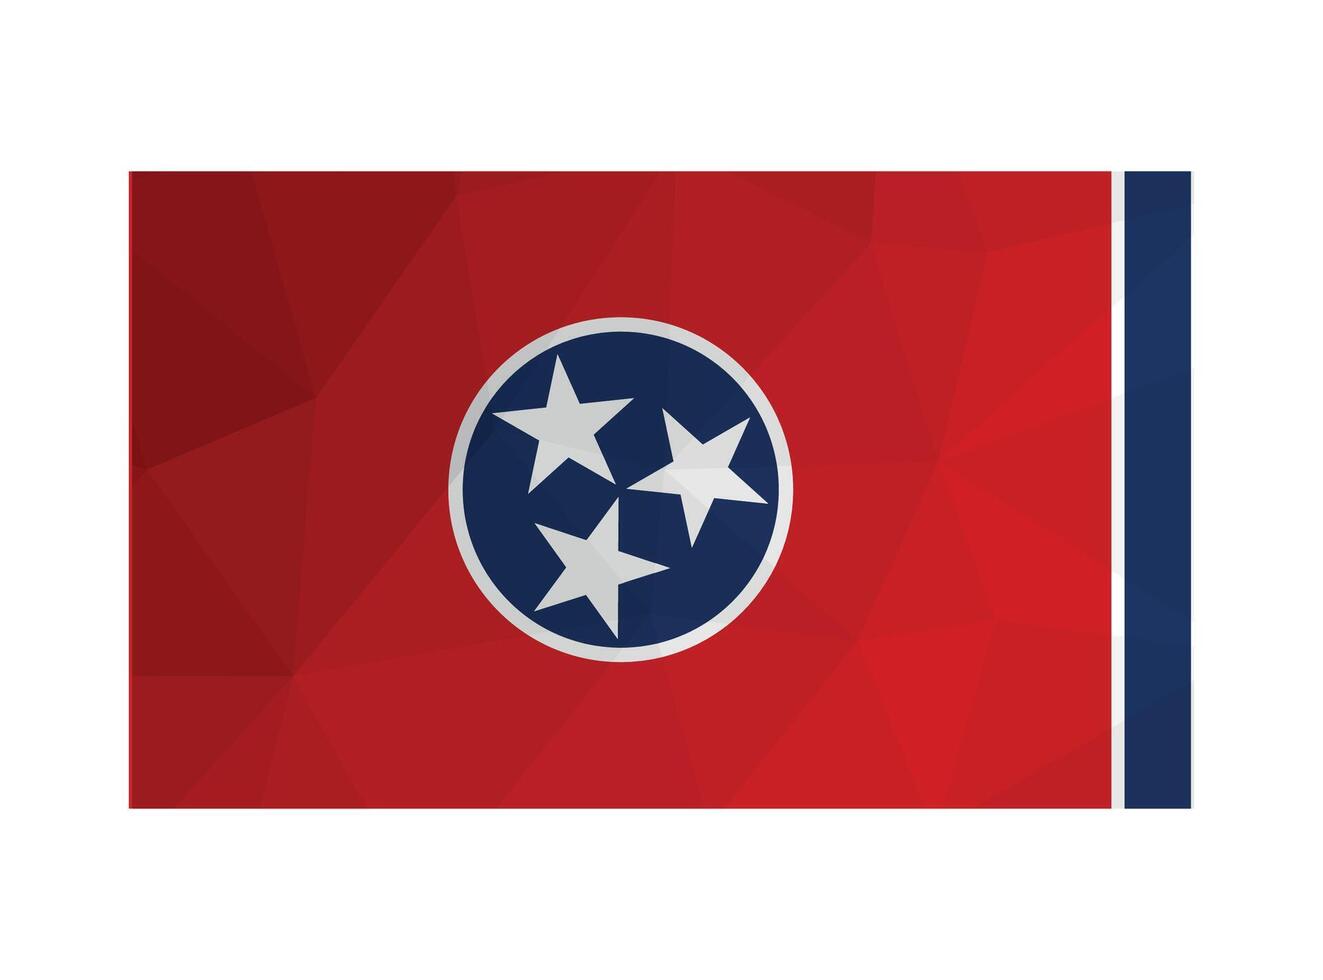 illustration. Official ensign of Tennessee, USA states. National flag in blue and red colors with 3 white stars. Creative design in polygonal style with triangular shapes vector